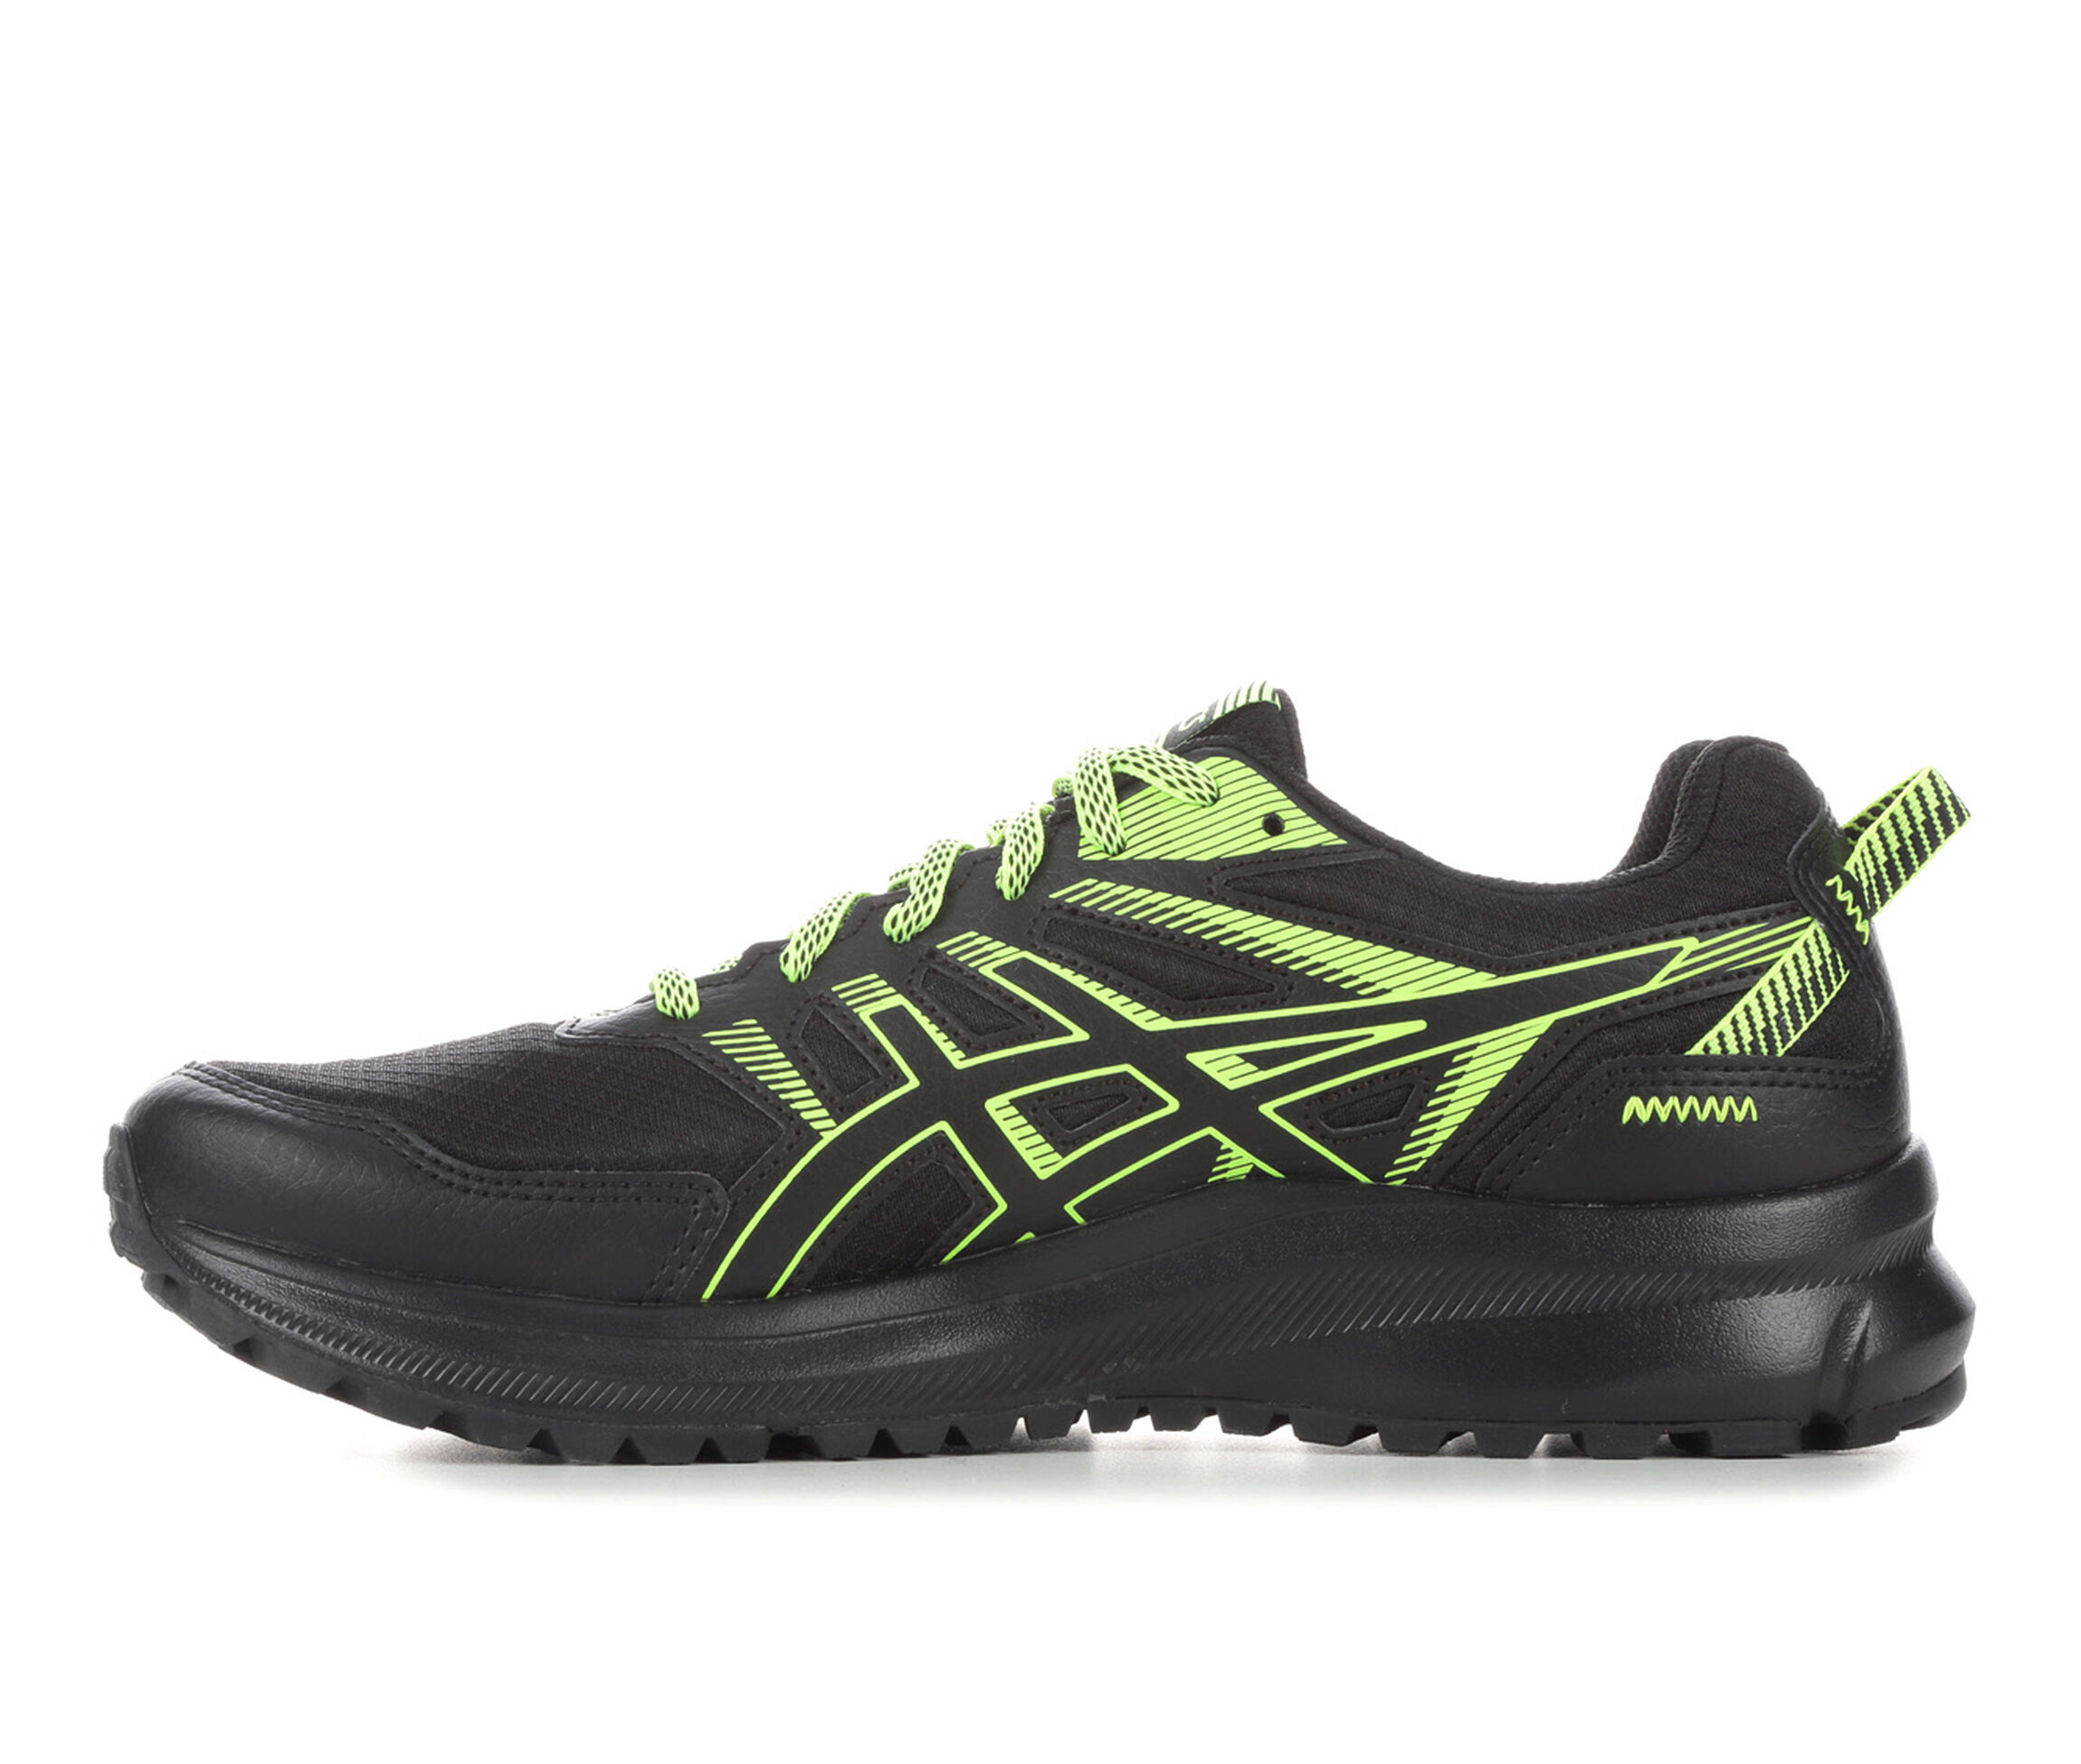 ASICS Running Shoes & Trail Sneakers | Shoe Carnival